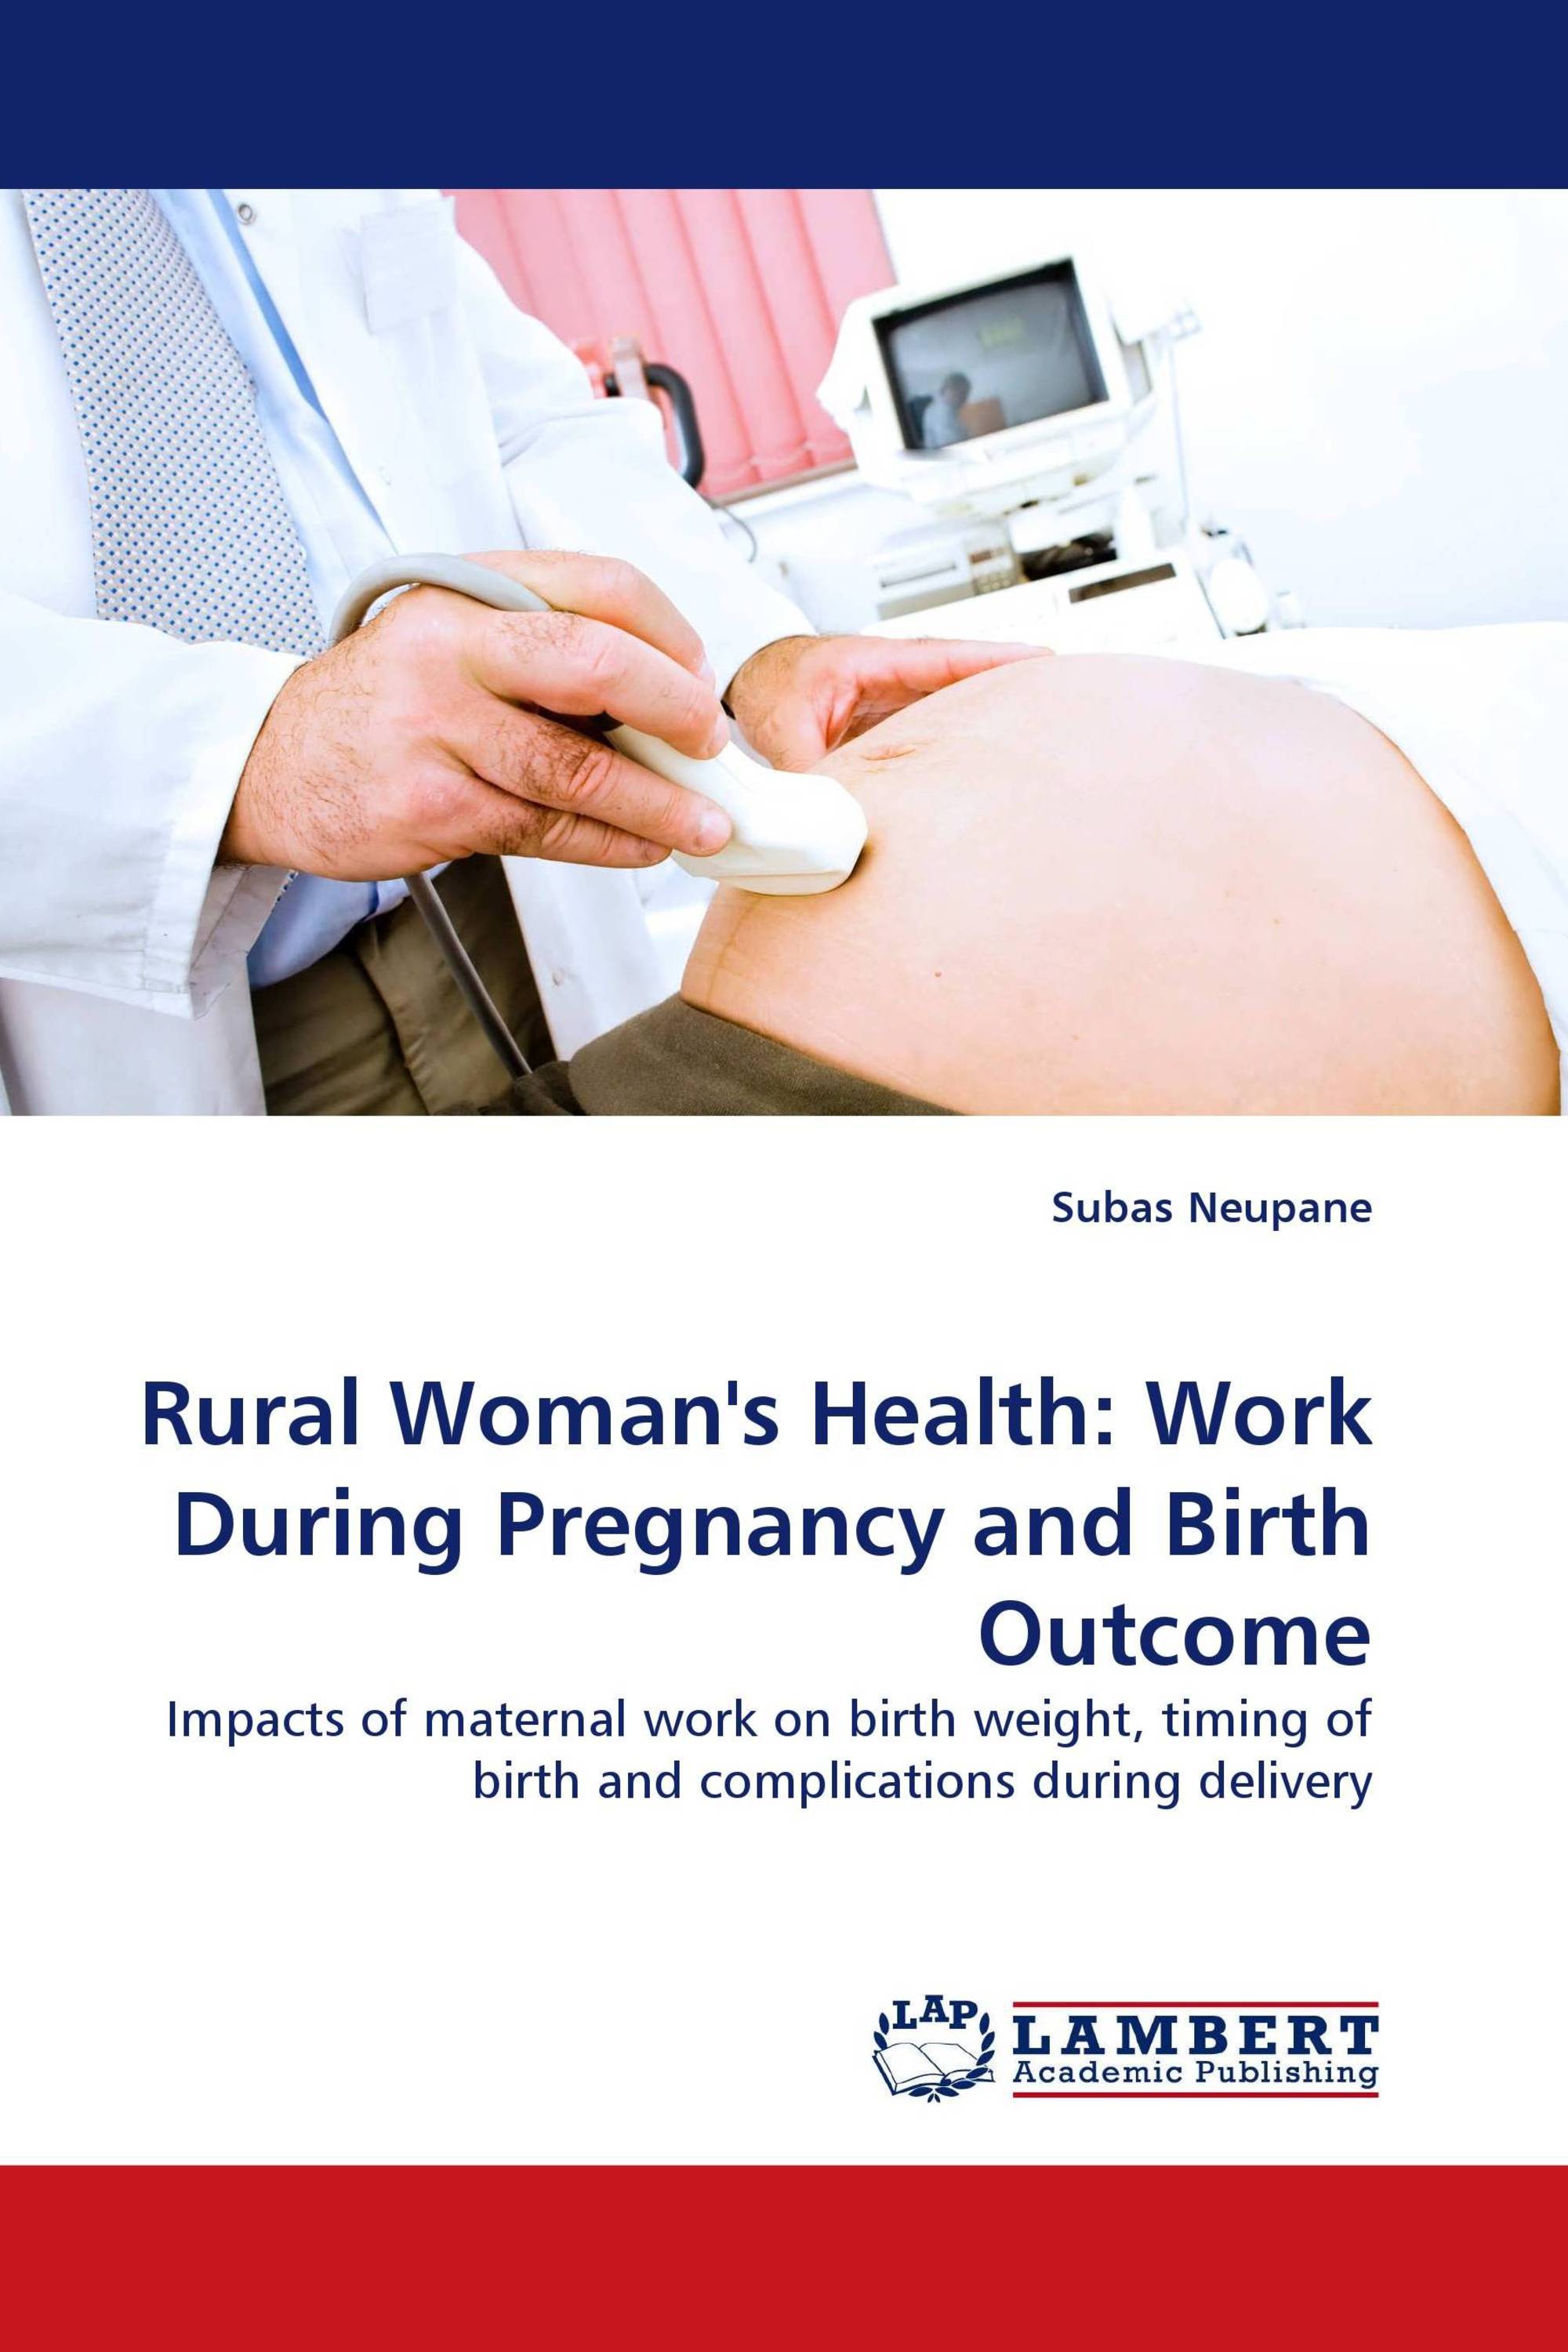 Rural Woman's Health: Work During Pregnancy and Birth Outcome